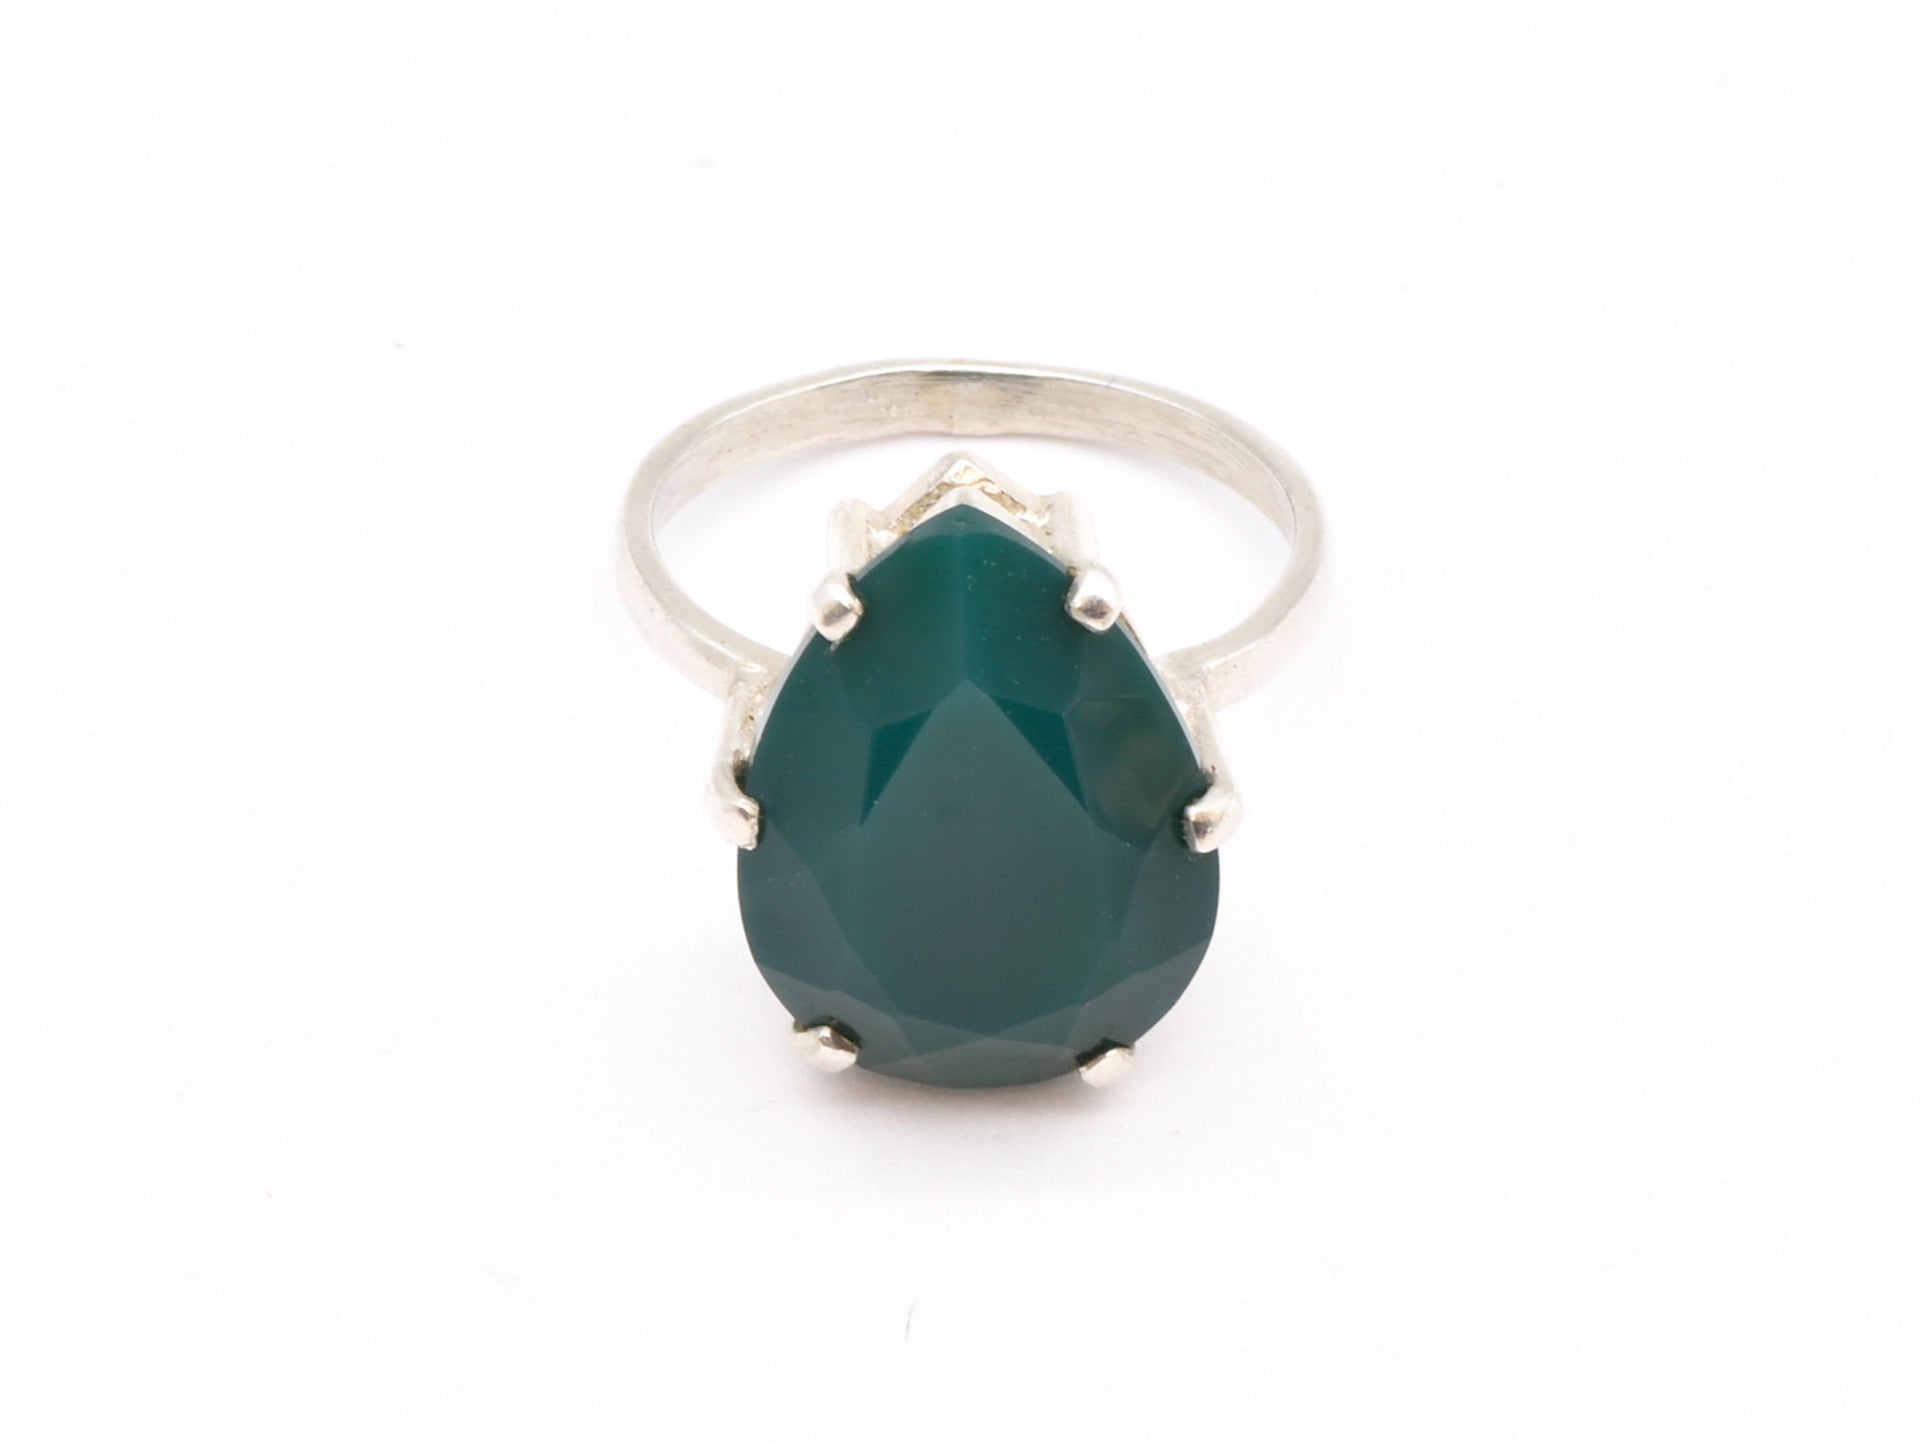 NEW VINTAGE RINGS Large Green Square Crystal Statement for Women